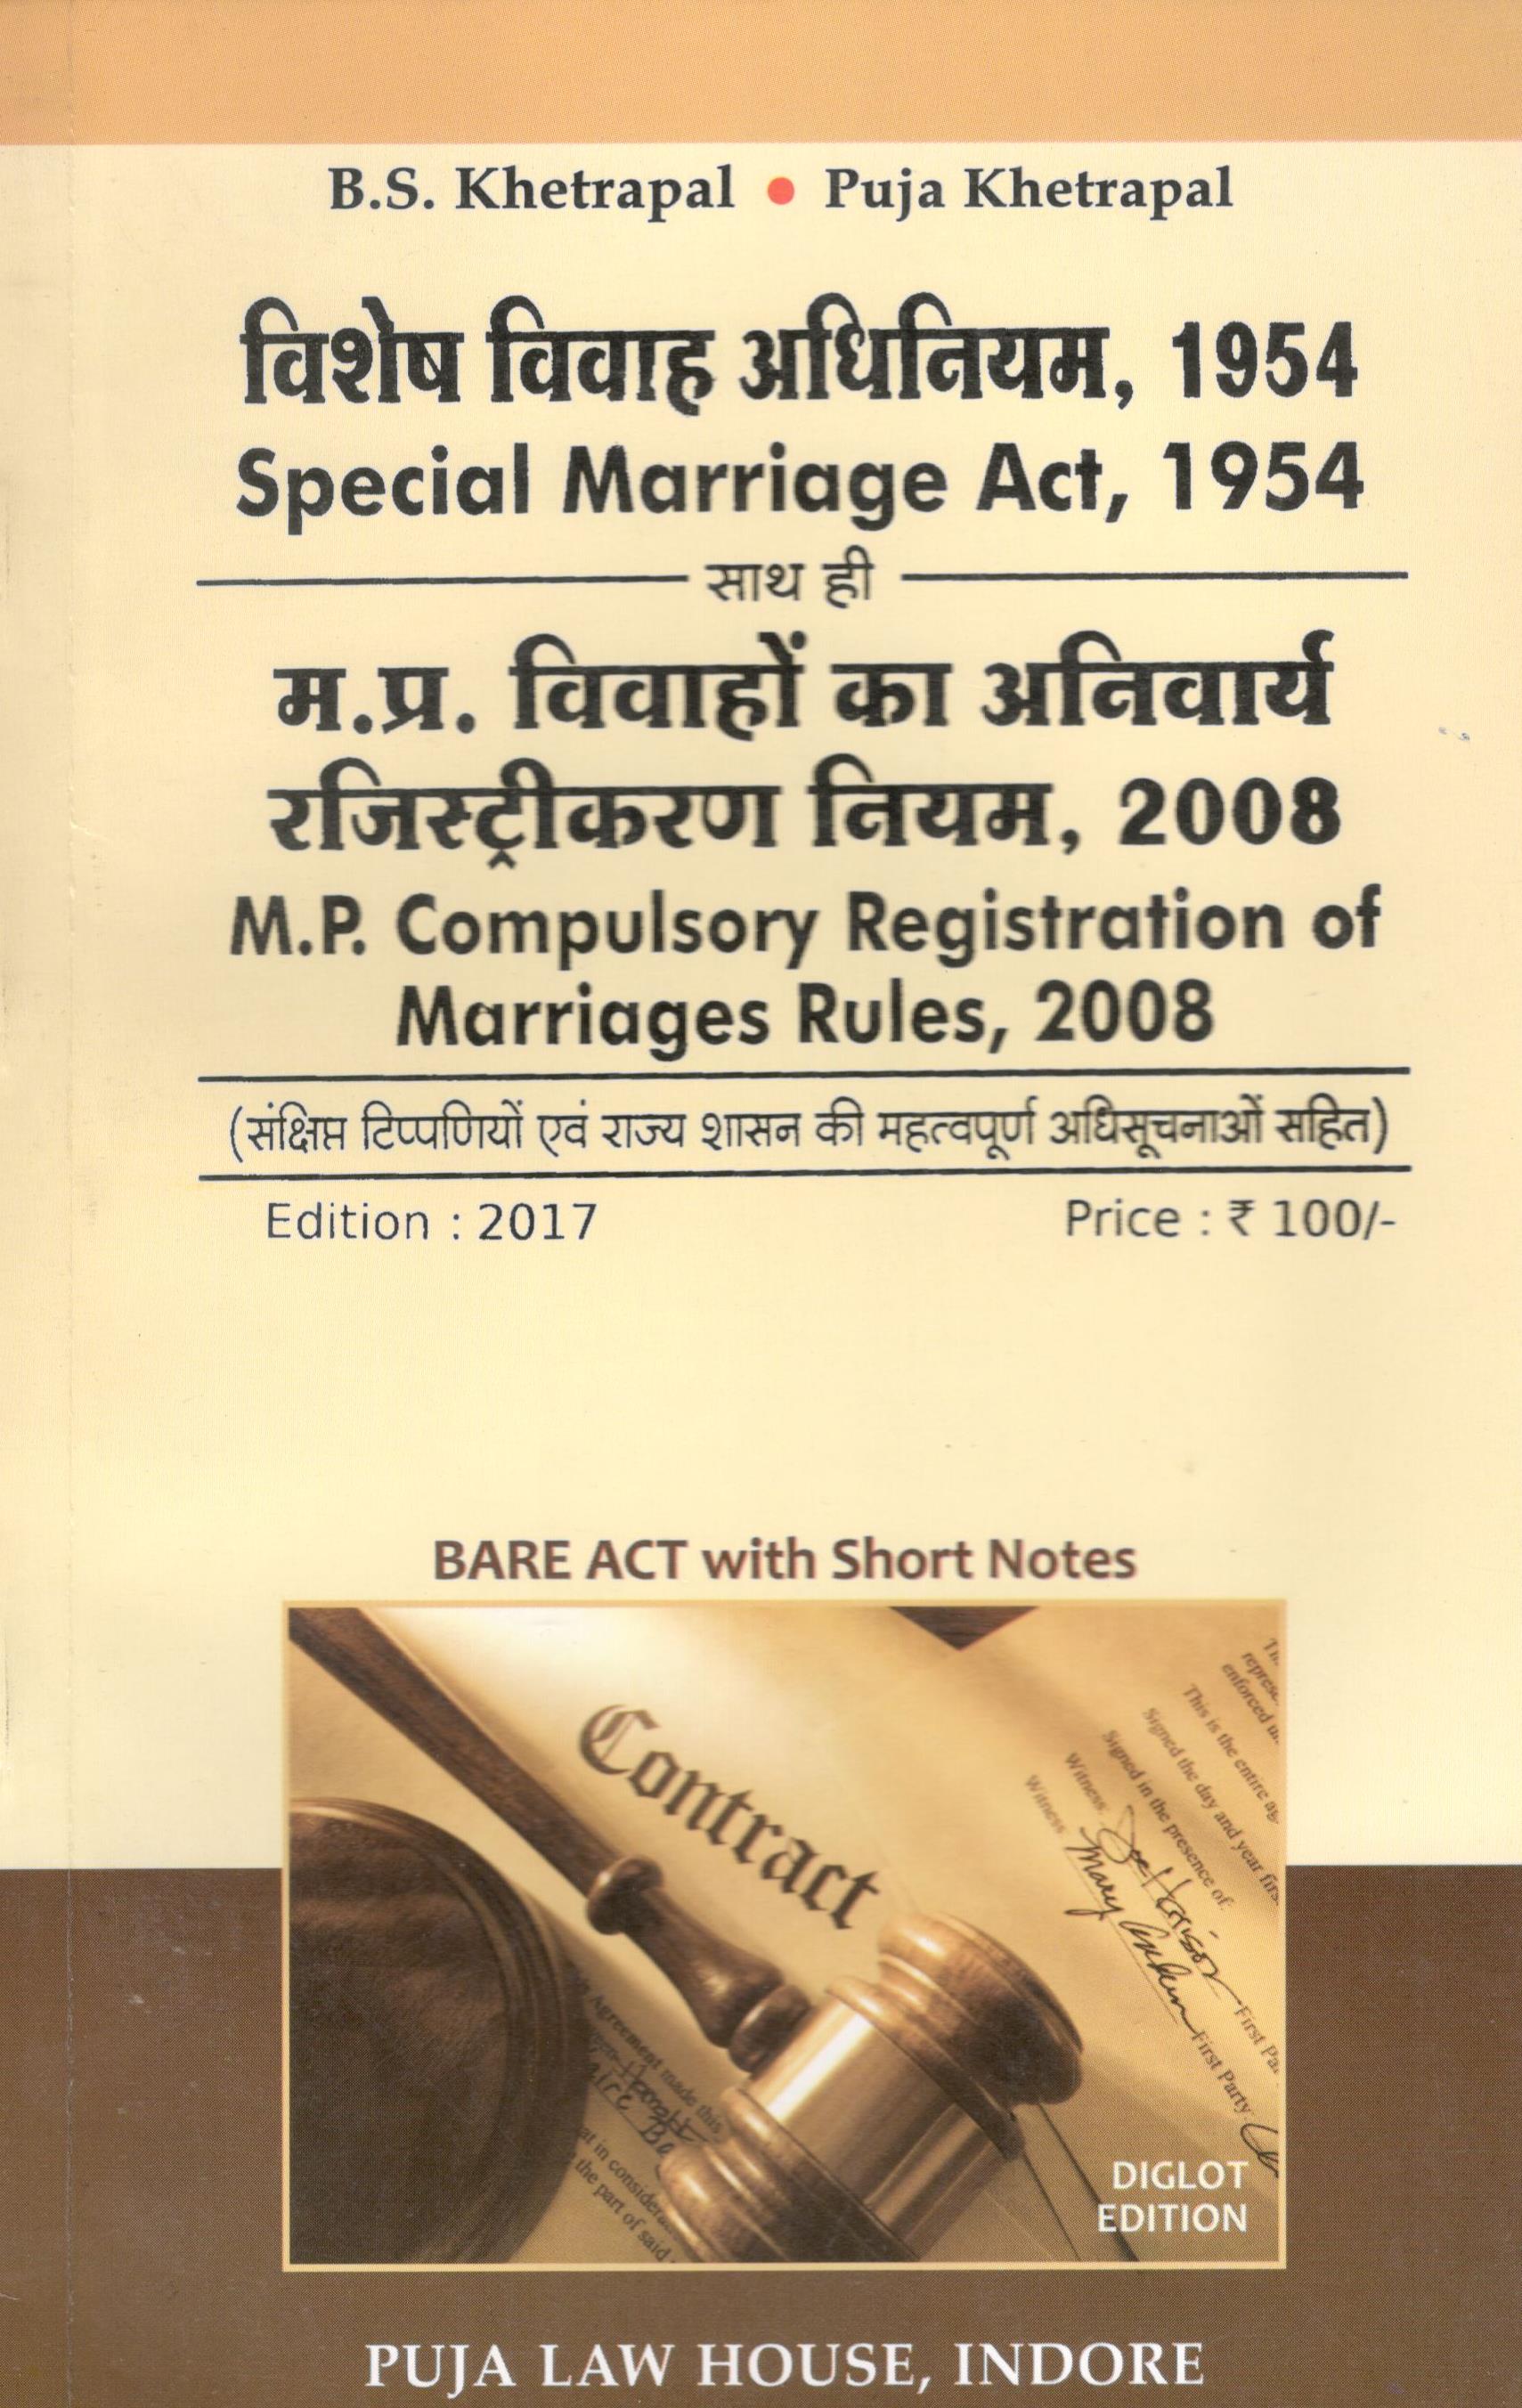 विशेष विवाह अधिनियम, 1954 / Special Marriage Act, 1954 